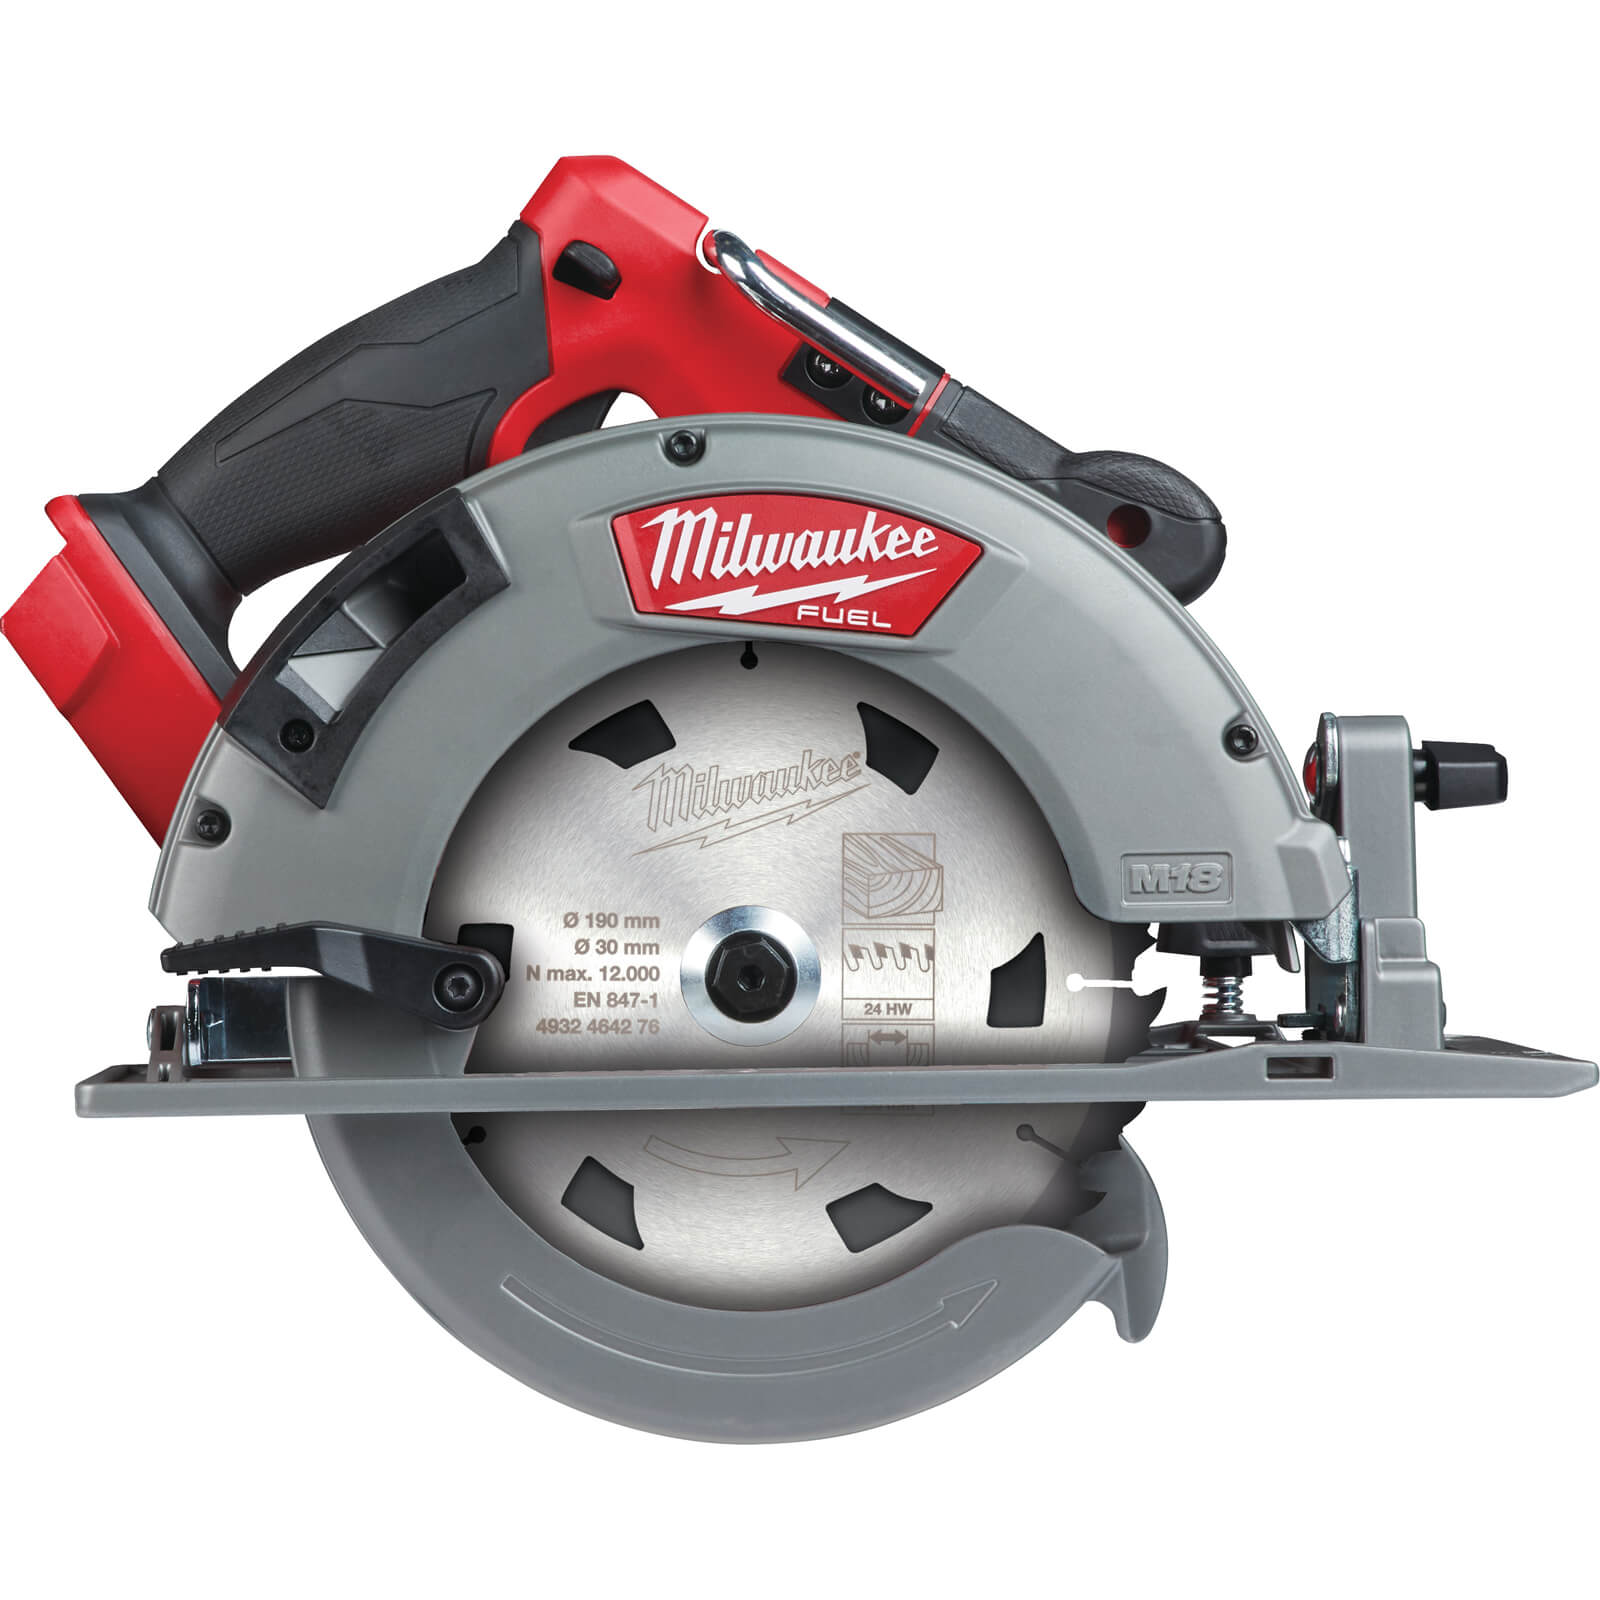 Image of Milwaukee M18 FCS66 Fuel 18v Cordless Brushless Circular Saw 190mm No Batteries No Charger No Case